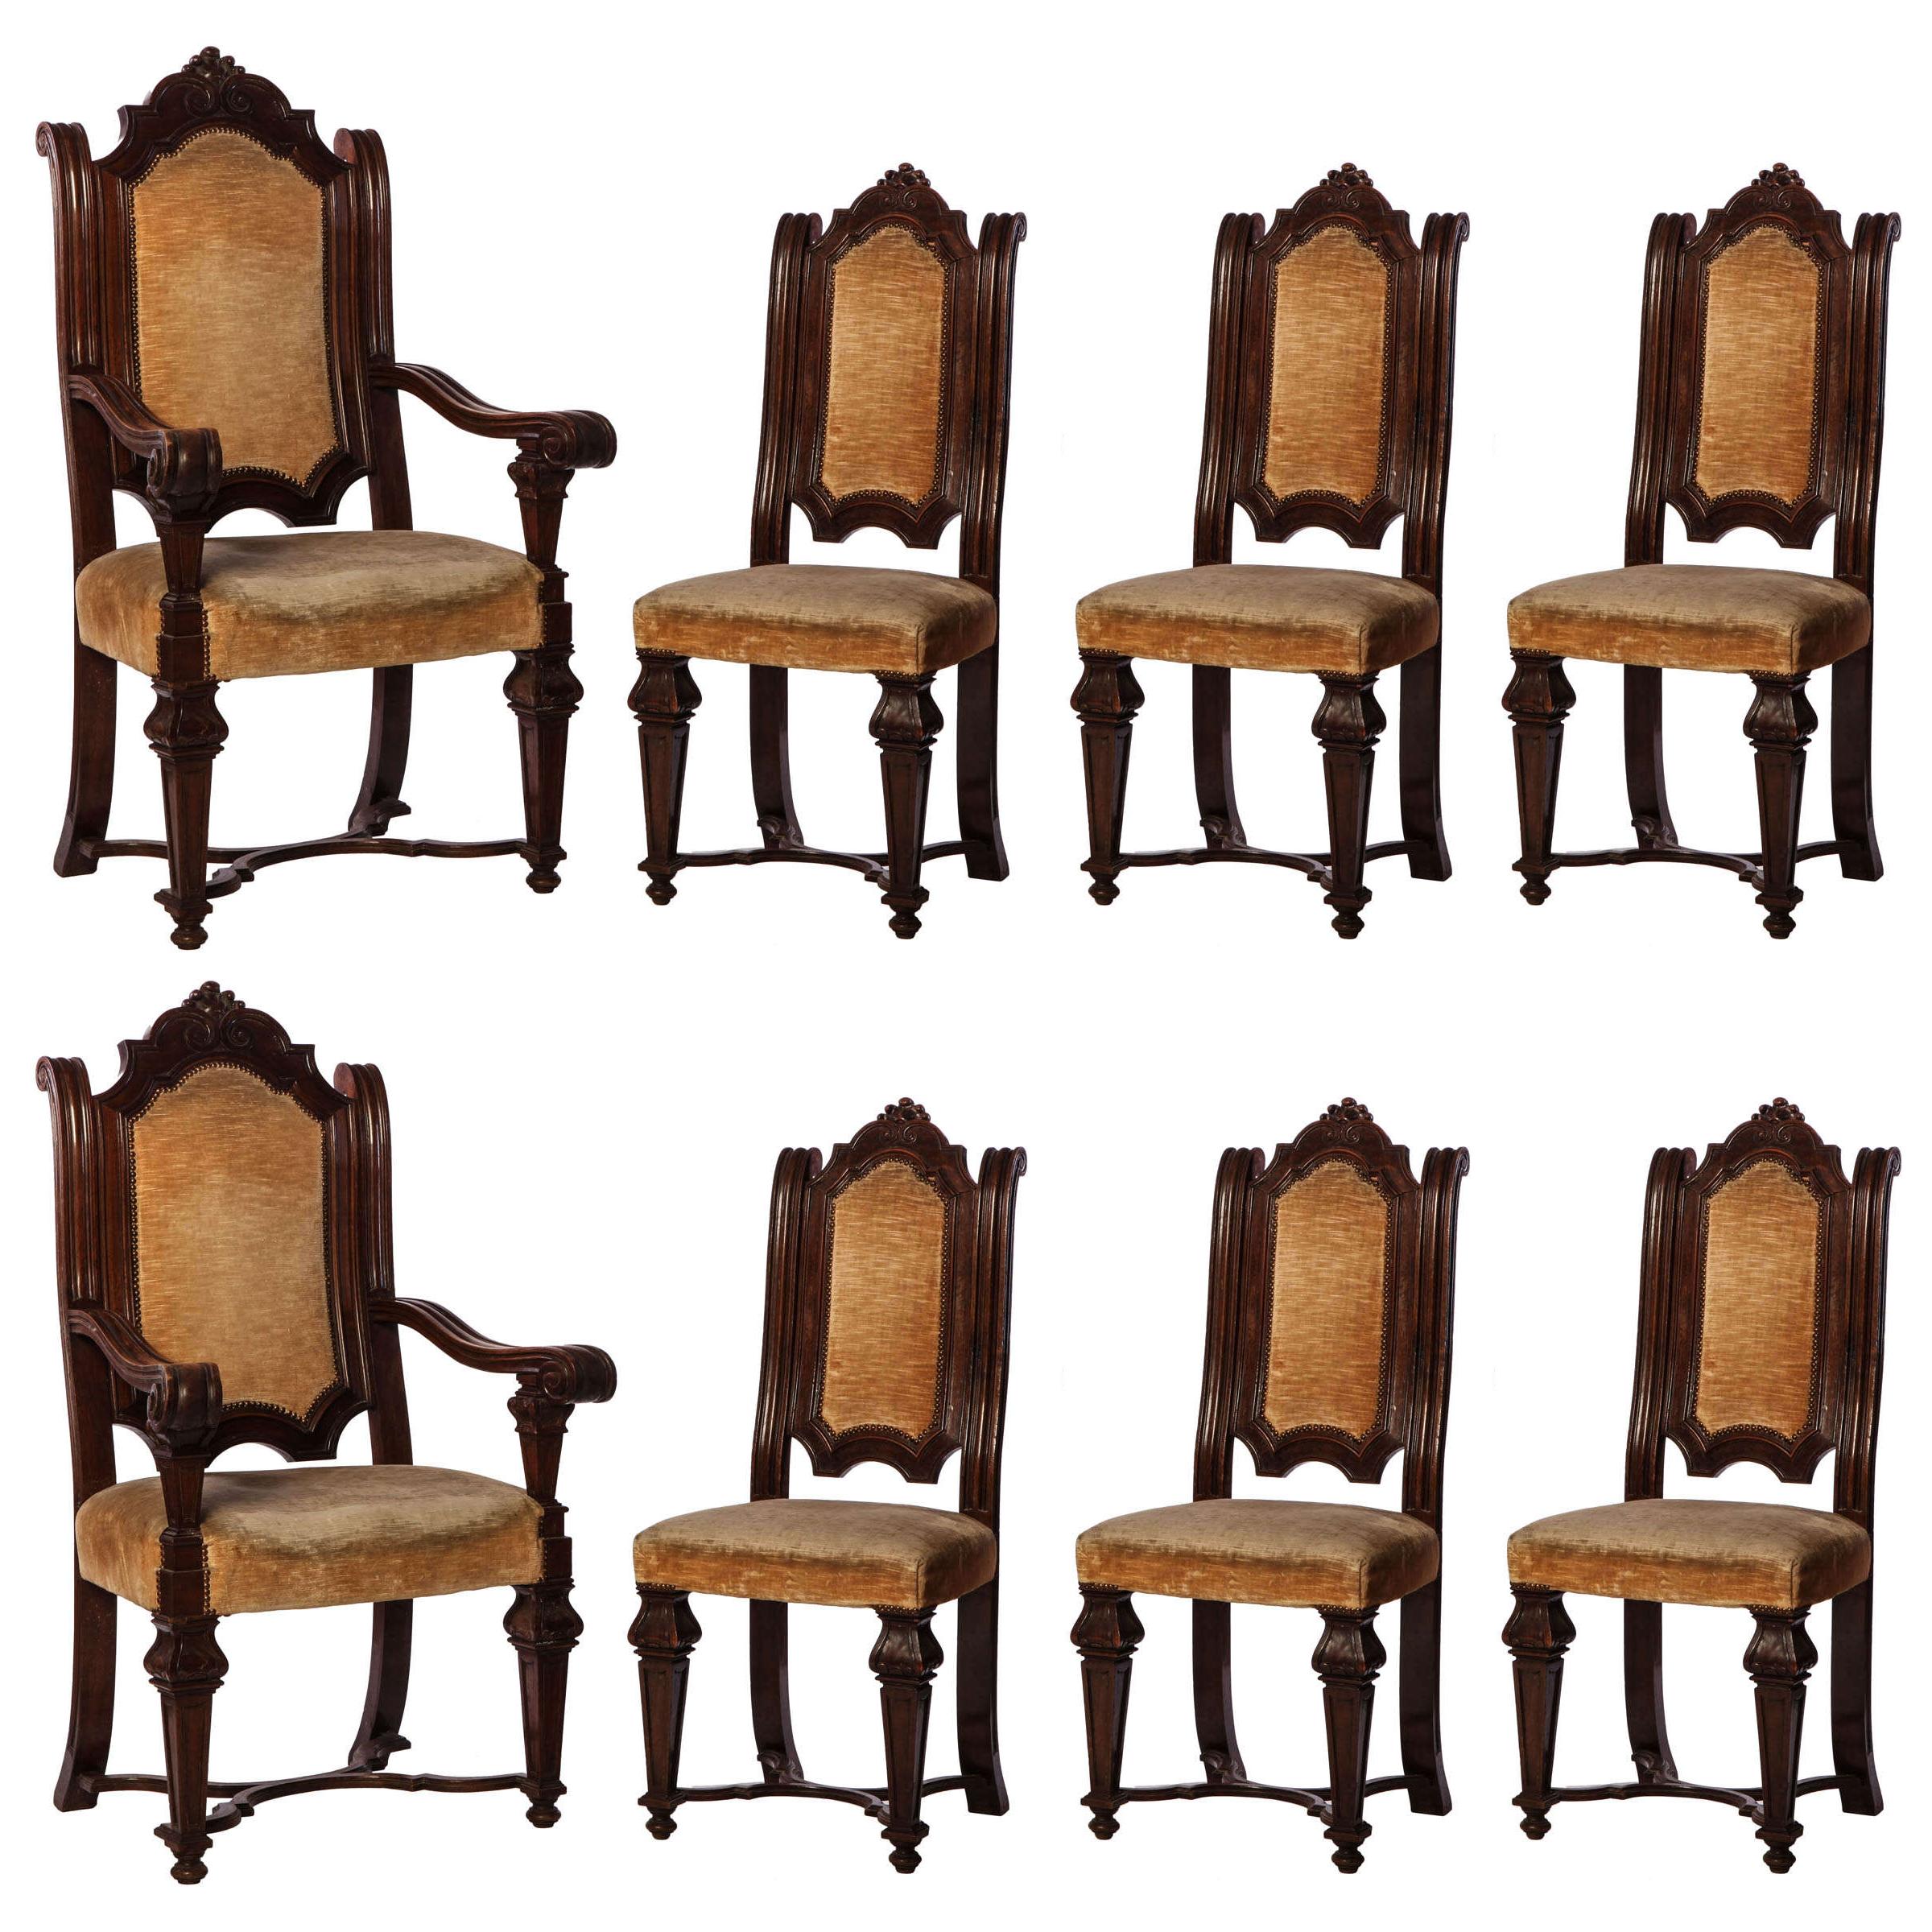 Italian Renaissance Revival Set of 6 Chairs and 2 Armchairs